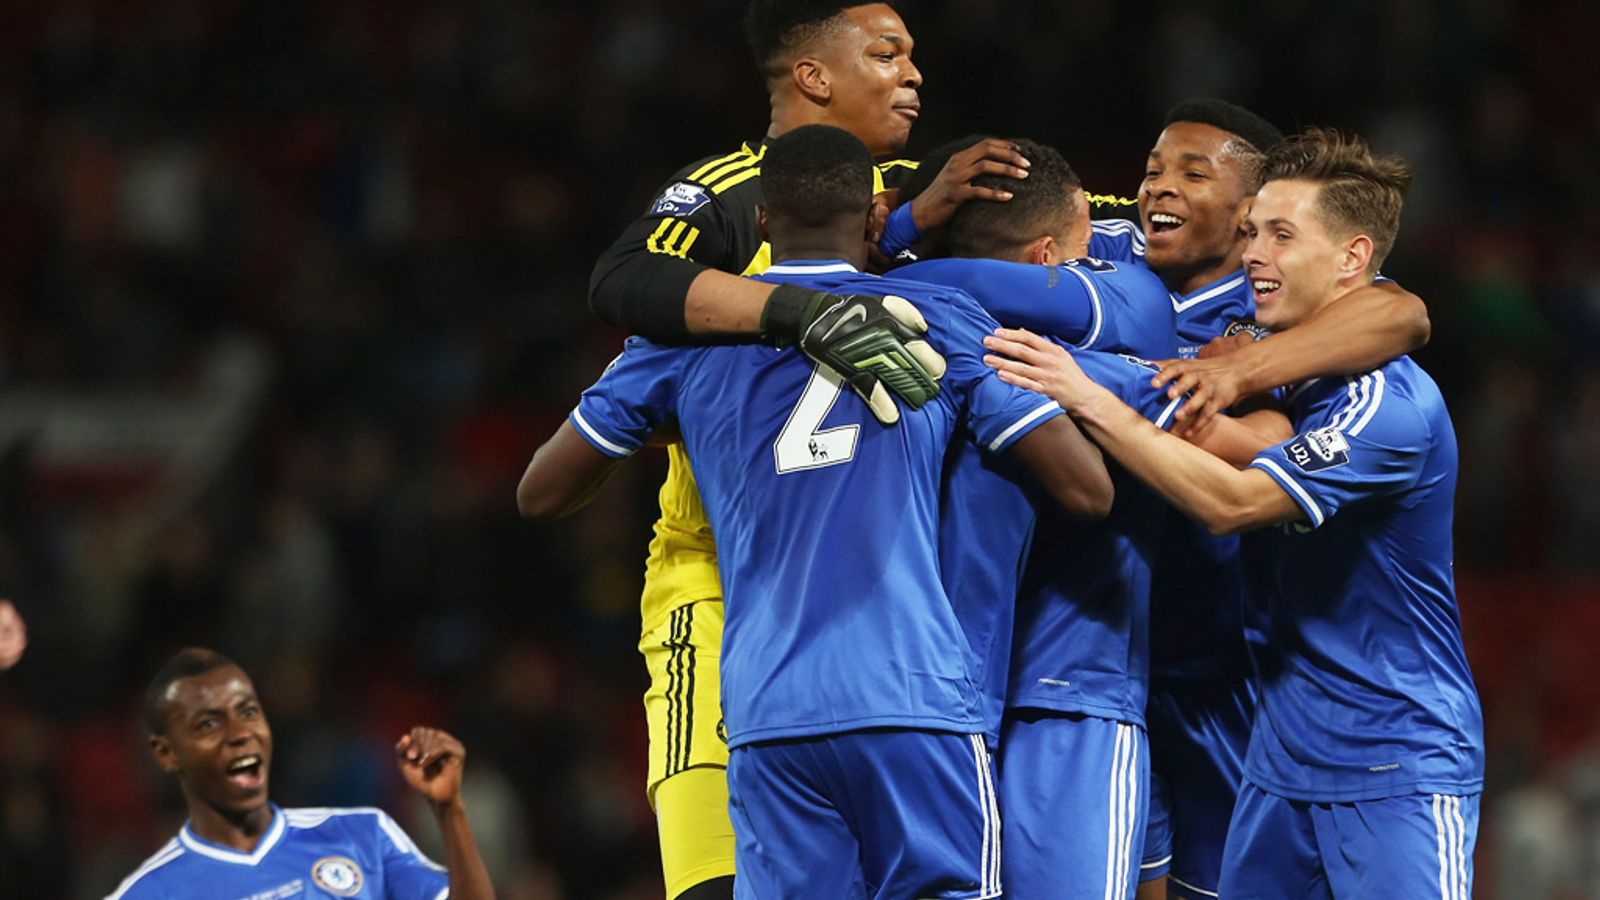 Chelsea beat Manchester United 2-1 in the Under-21 Premier League final